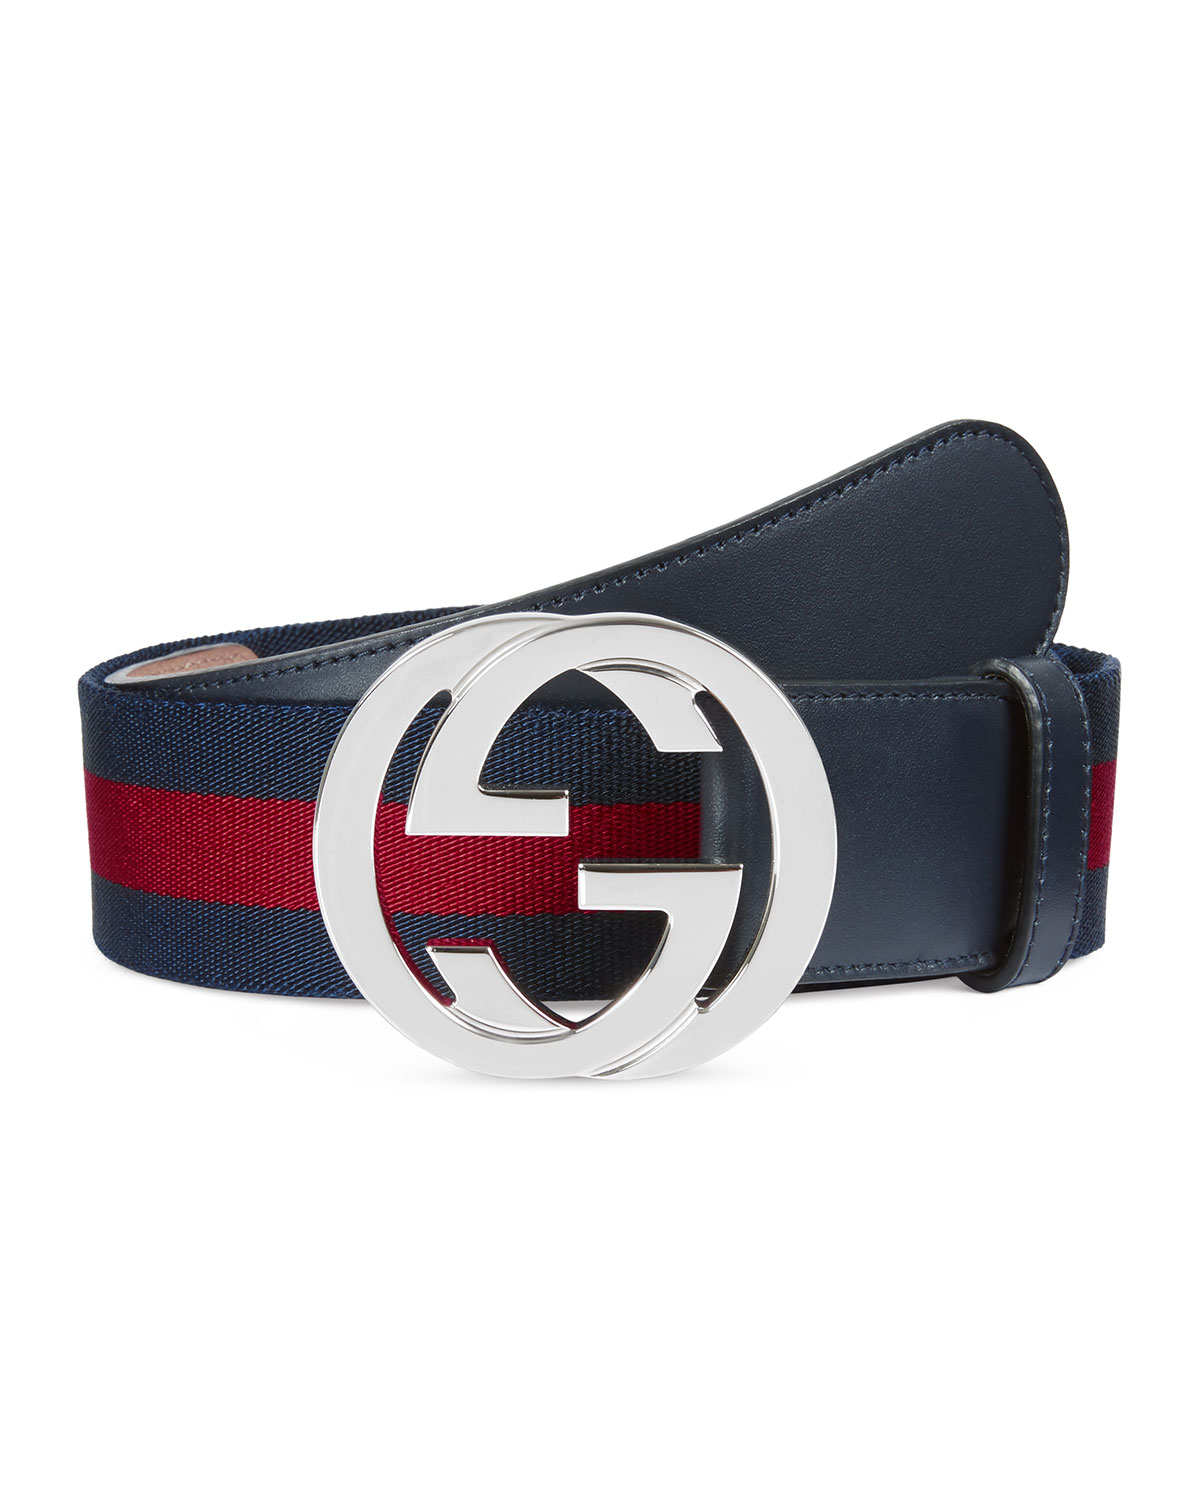 web belt with g buckle gucci